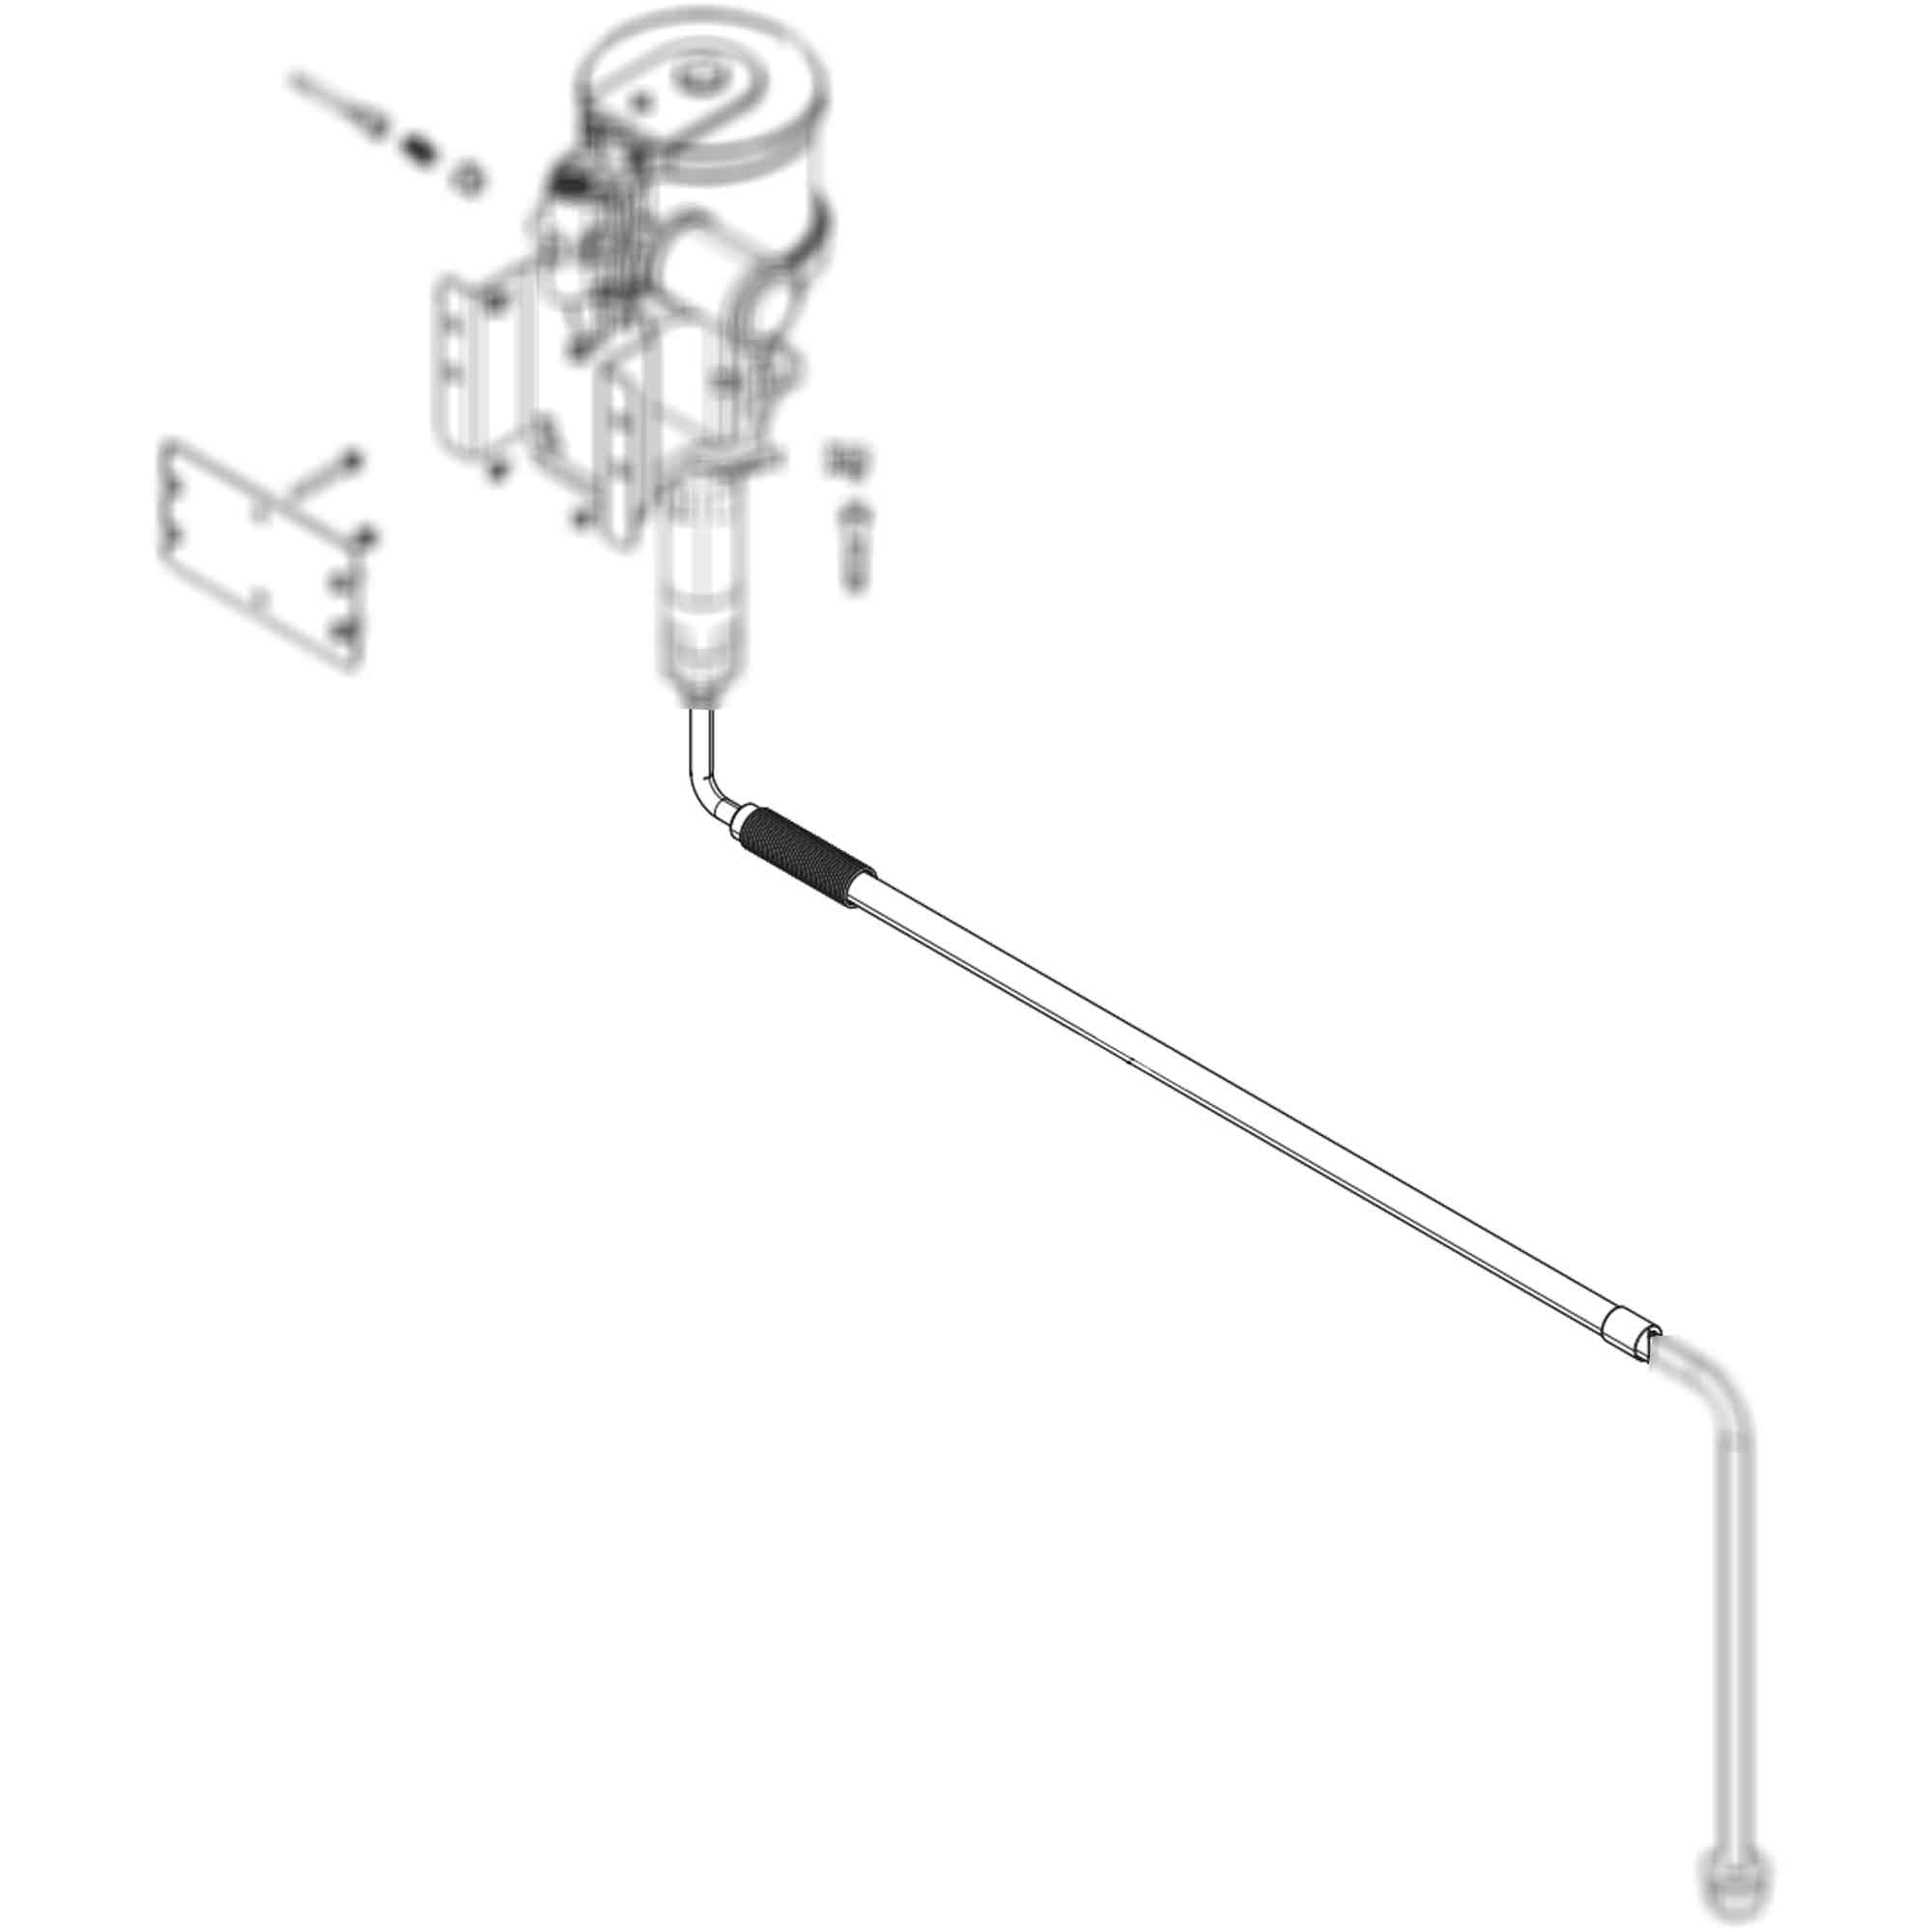 256421 - Suction Hose Kit and Strainer - PURspray